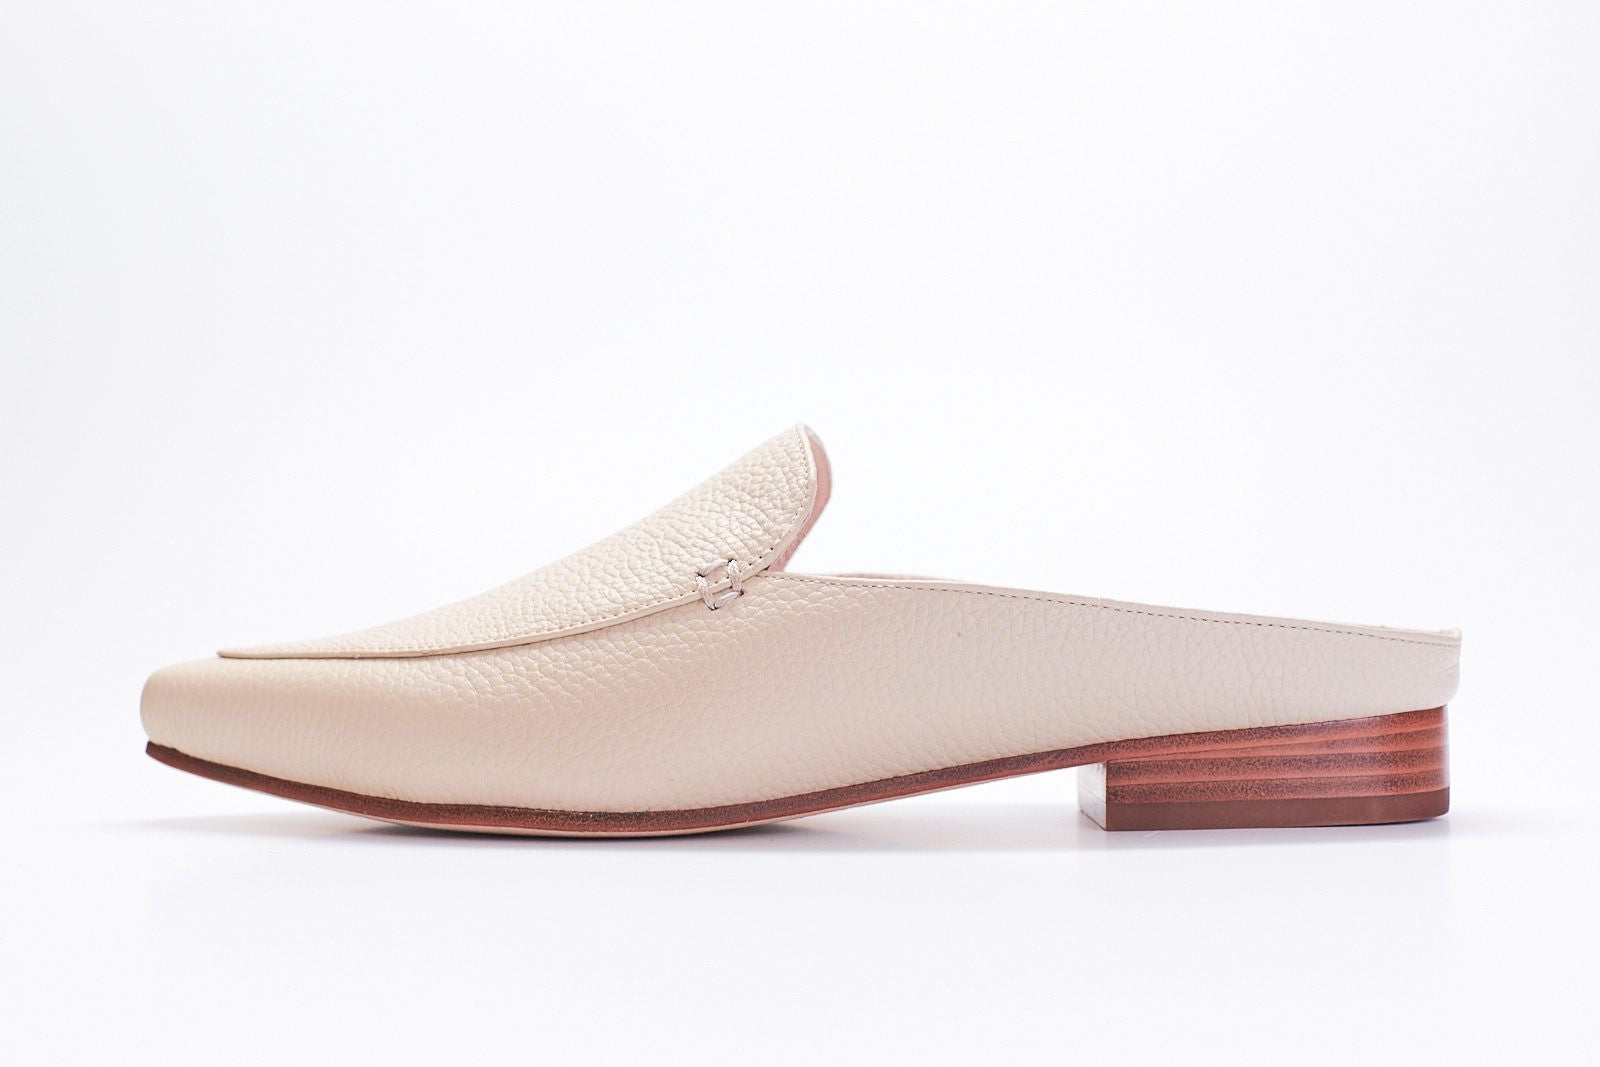 oyster colored tumbled leather mule slides with plain vamp and stacked brown heel.